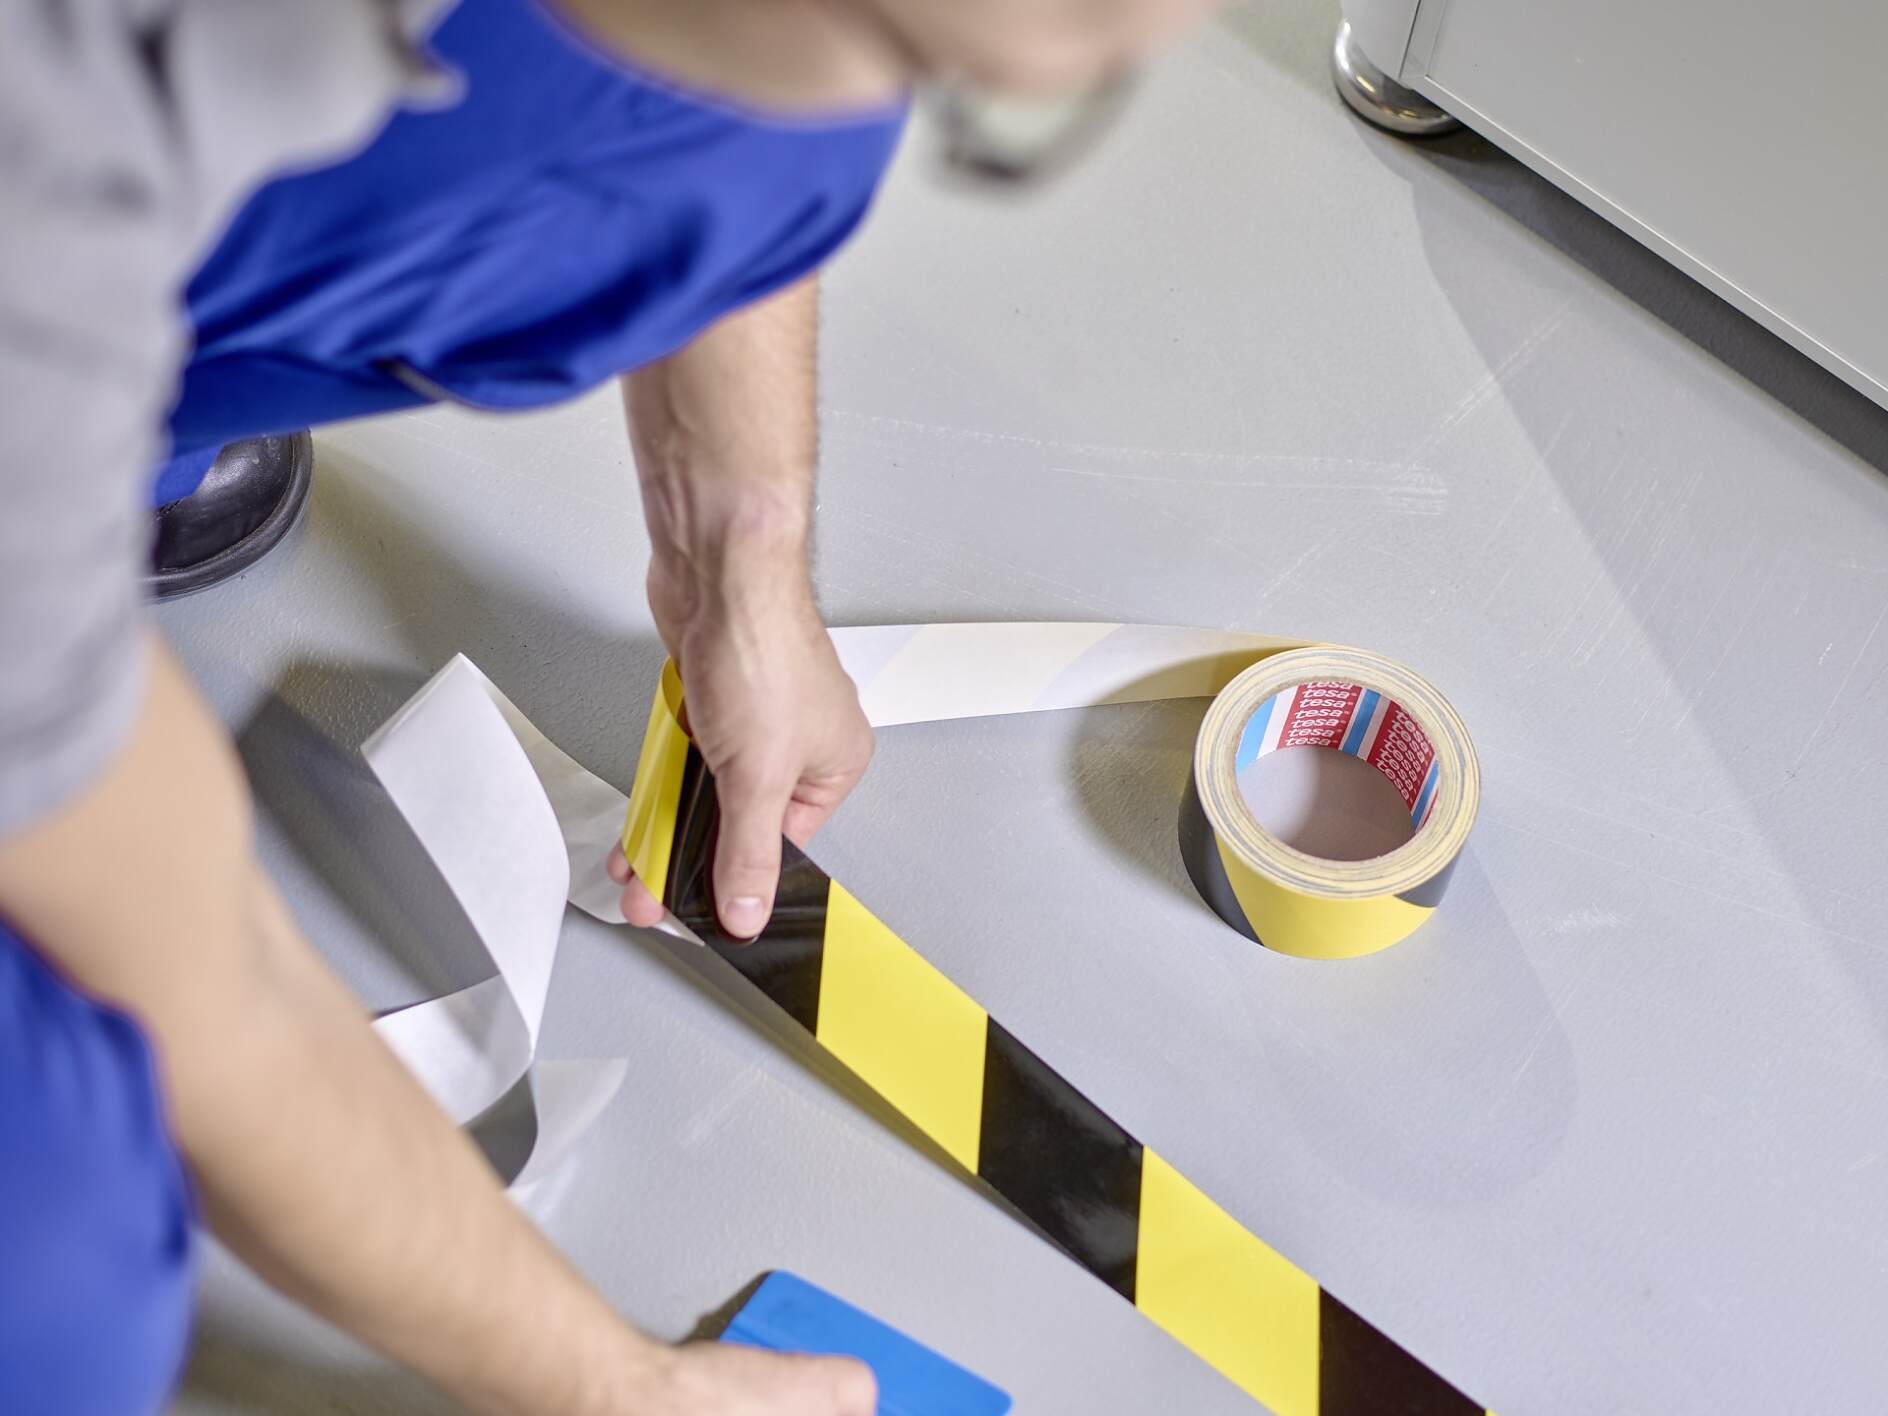 Removable floor marking tape